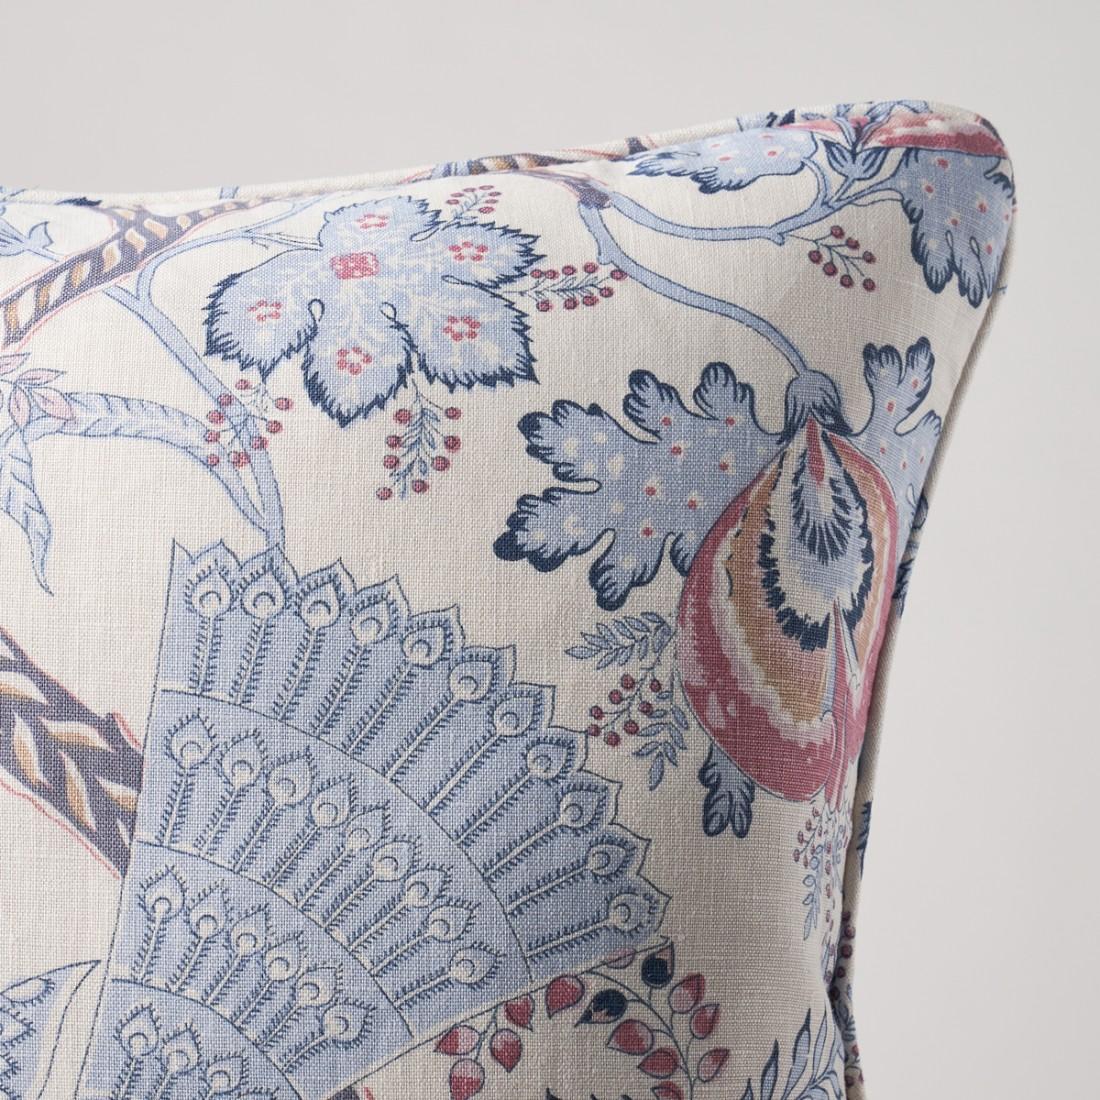 This pillow features Aveline Linen with a self welt finish. Aveline Linen in lilac is a beautiful handprinted fabric inhabited by regal peacocks and an undulating flowering vine, both rendered with fanciful, delicate details. Inspired by